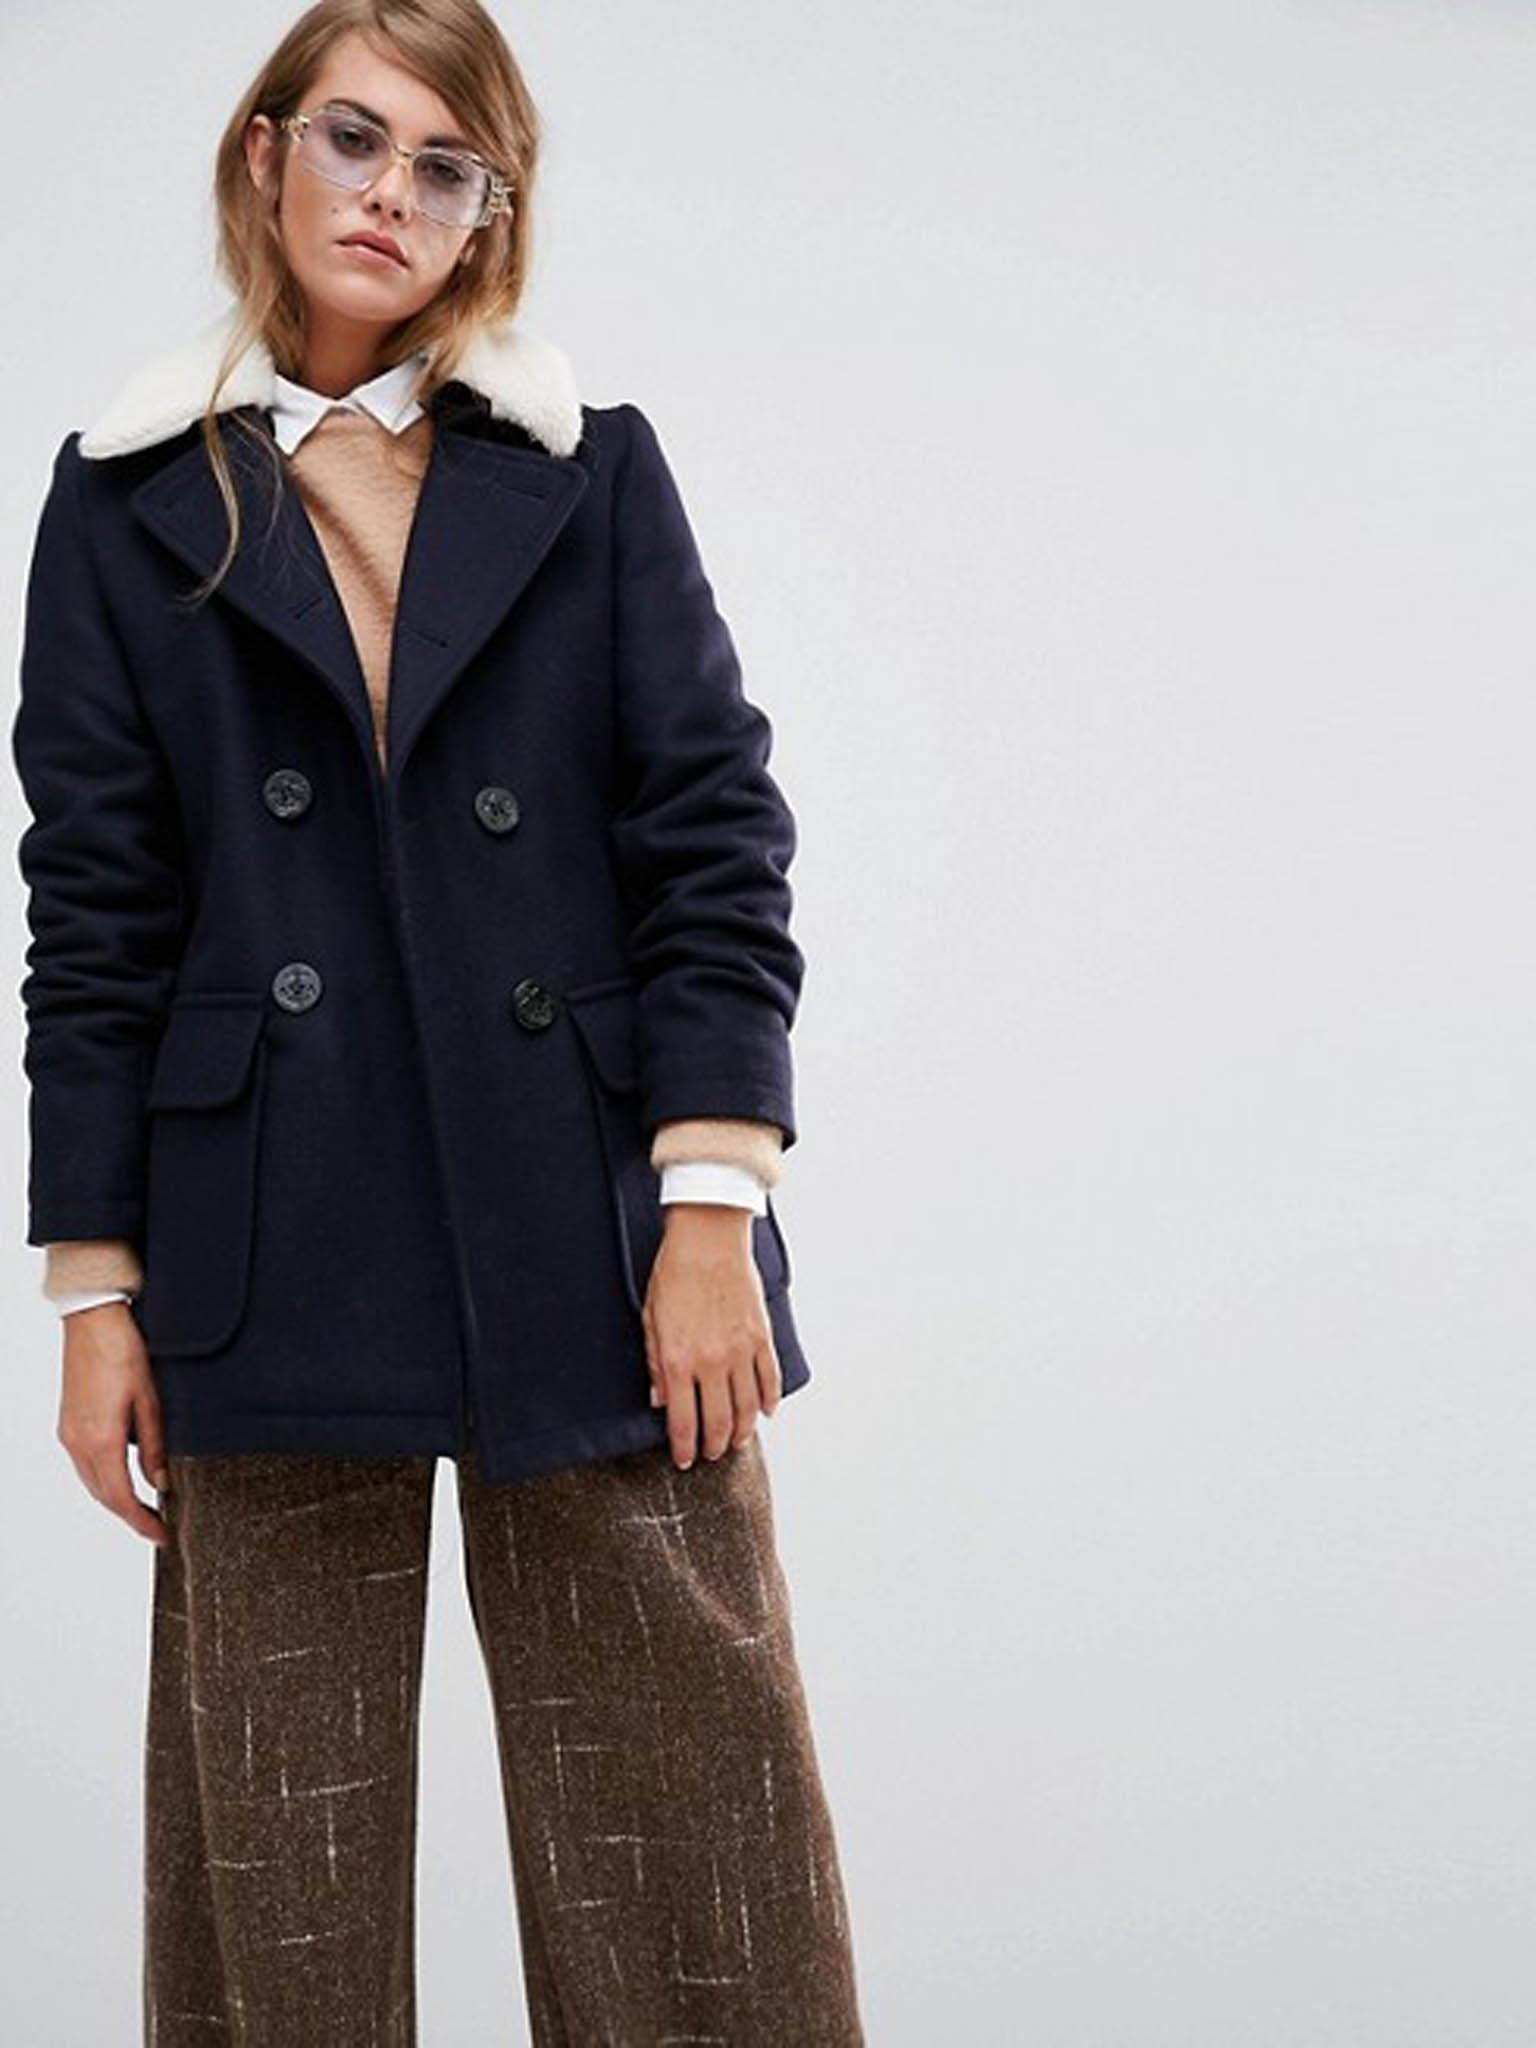 Gloverall Reefer Coat With Detachable Shearling Collar, £350, Asos.com